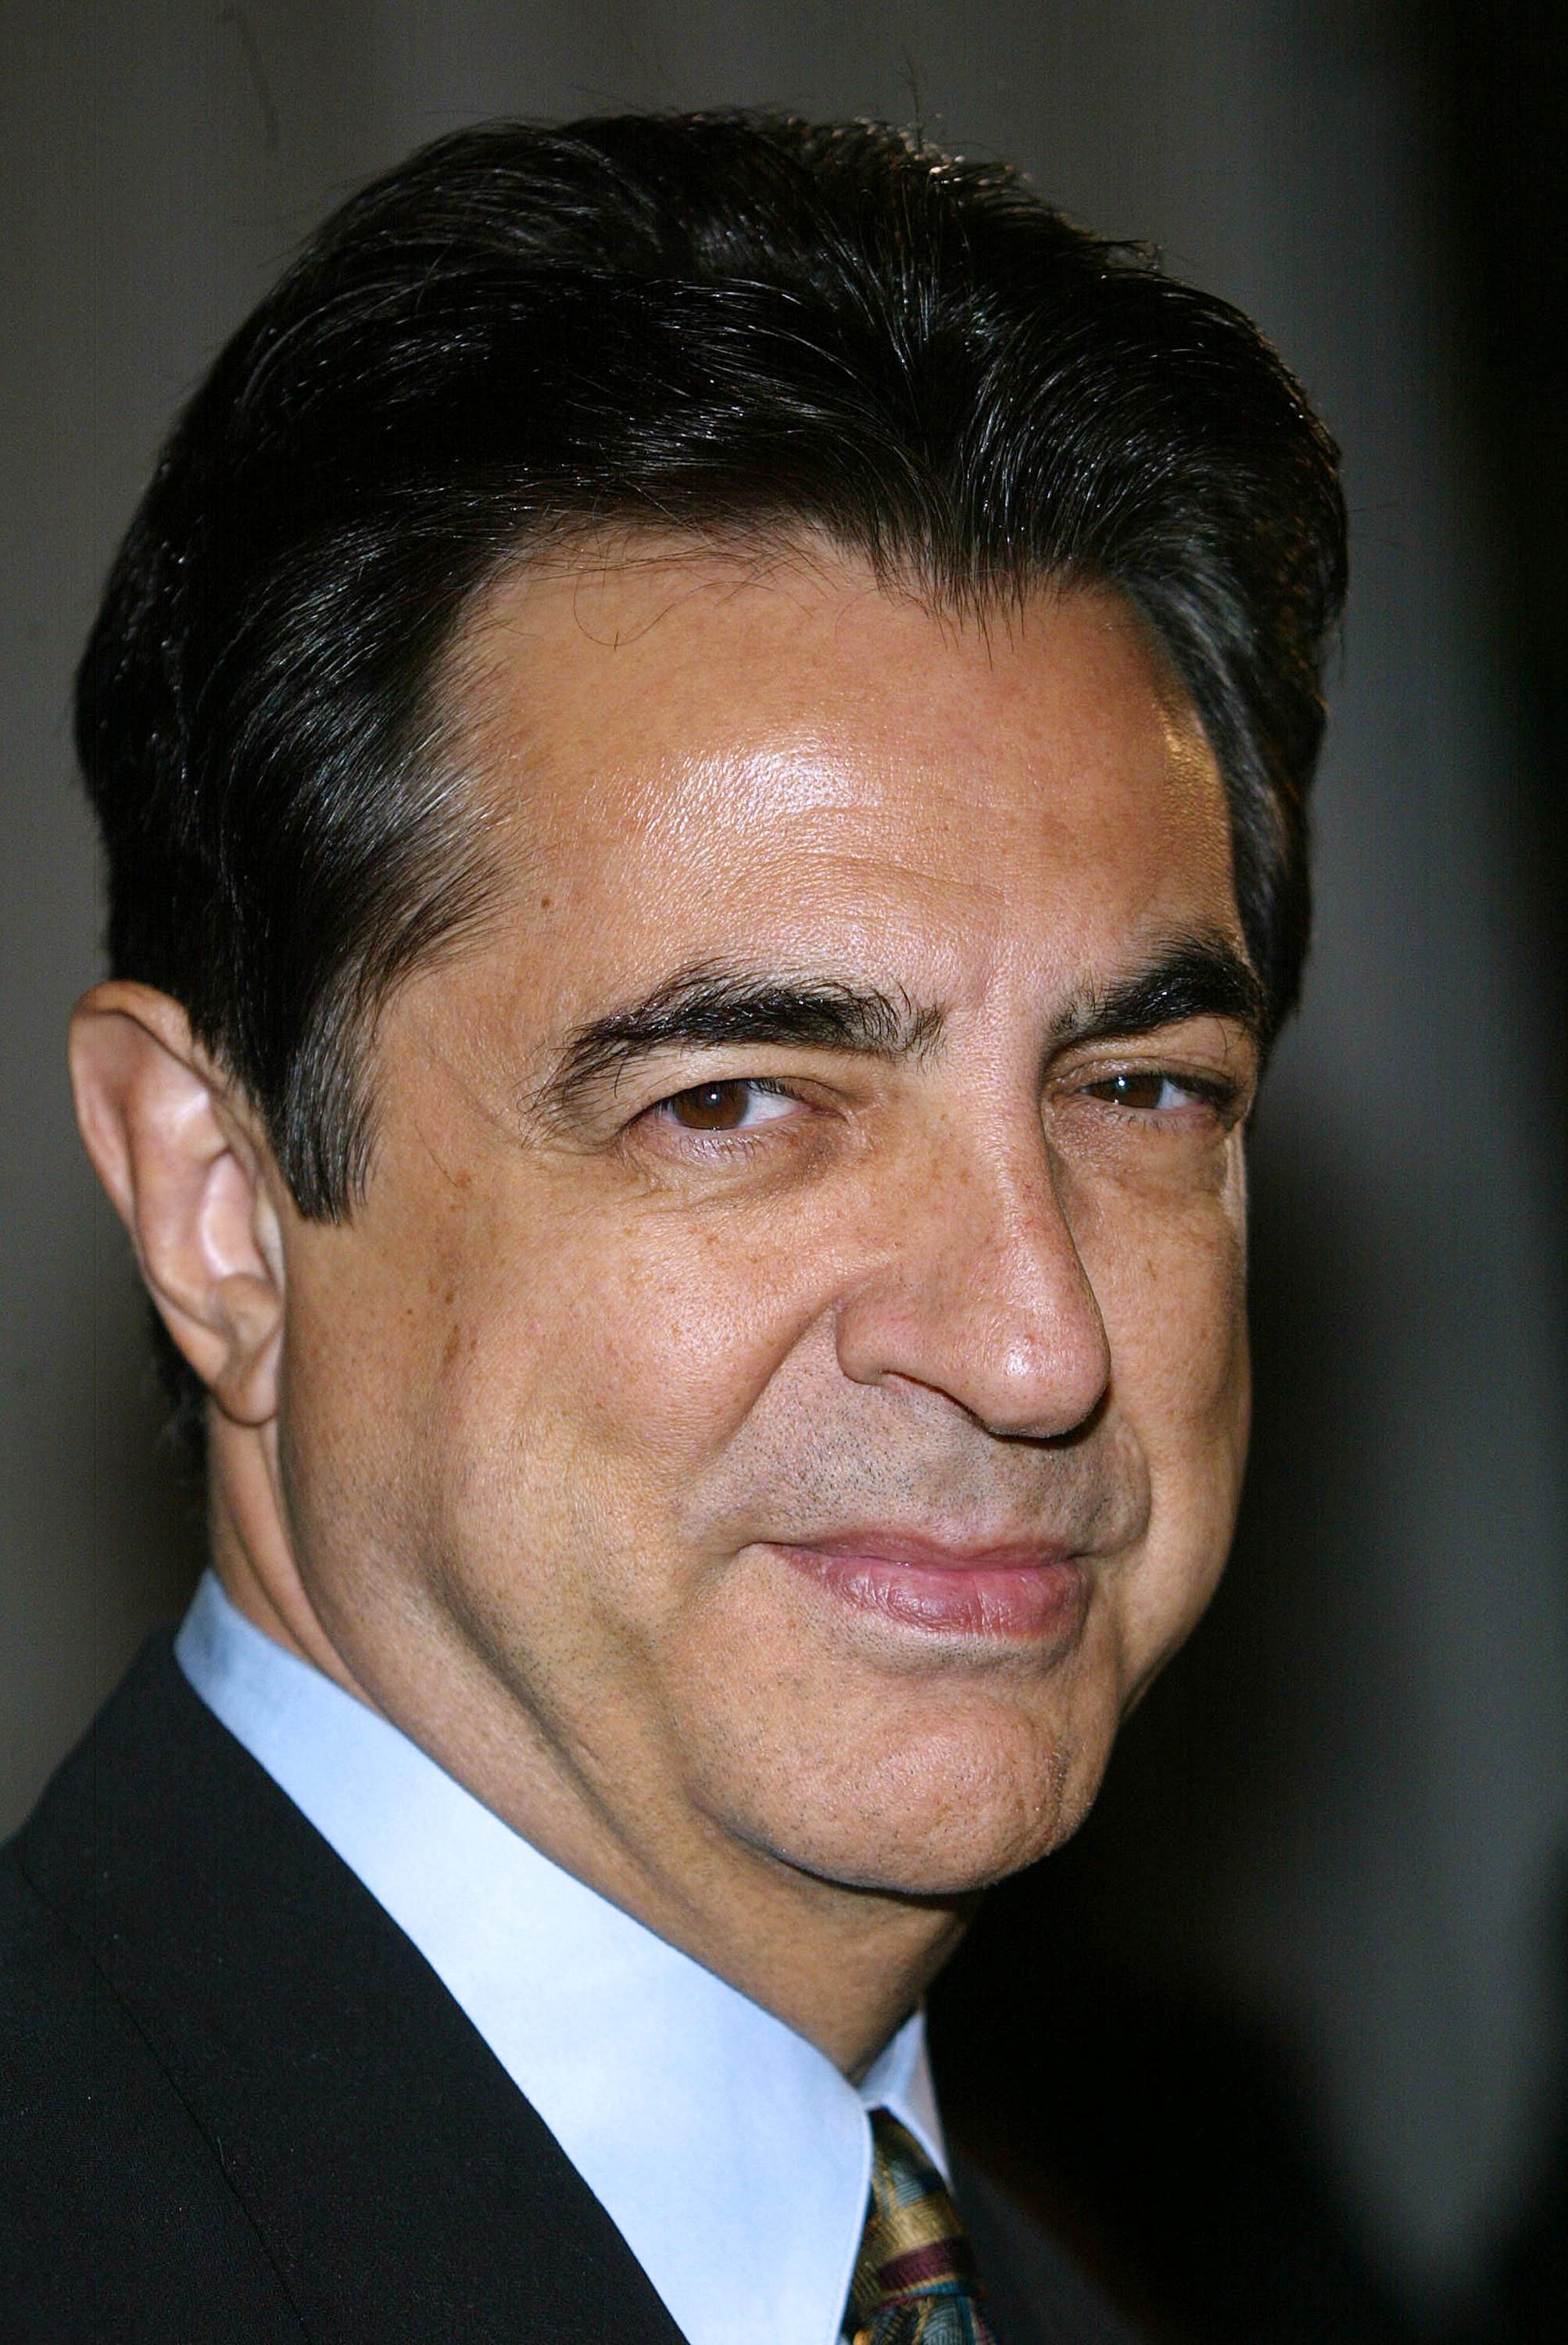 Actor Joe Mantegna during the Sixth Annual Family Television Awards at the Beverly Hilton Hotel on December 1, 2004 in Beverly Hills, California. / Source: Getty Images